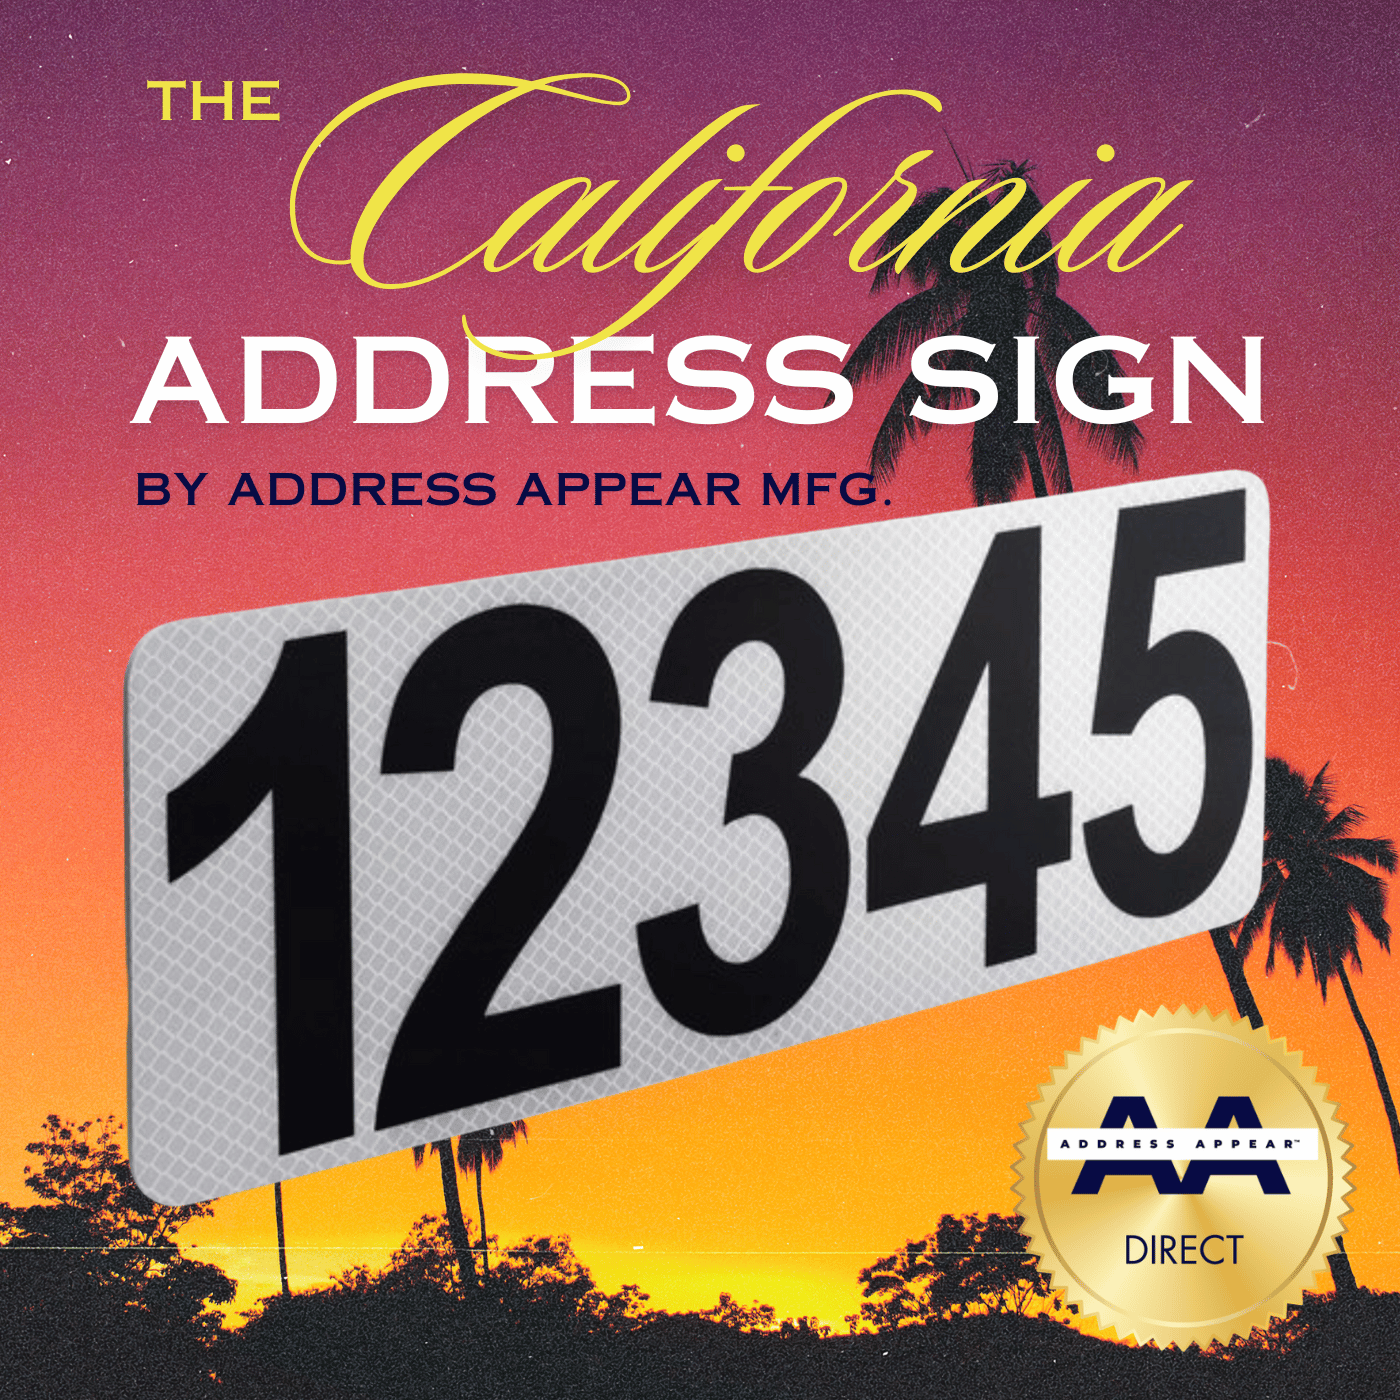 "The California Address Sign" Gift Card. Address Appear is proud to introduce our new Pre Paid Reflective Curb Address Sign Gift Cards. Now available for purchase!